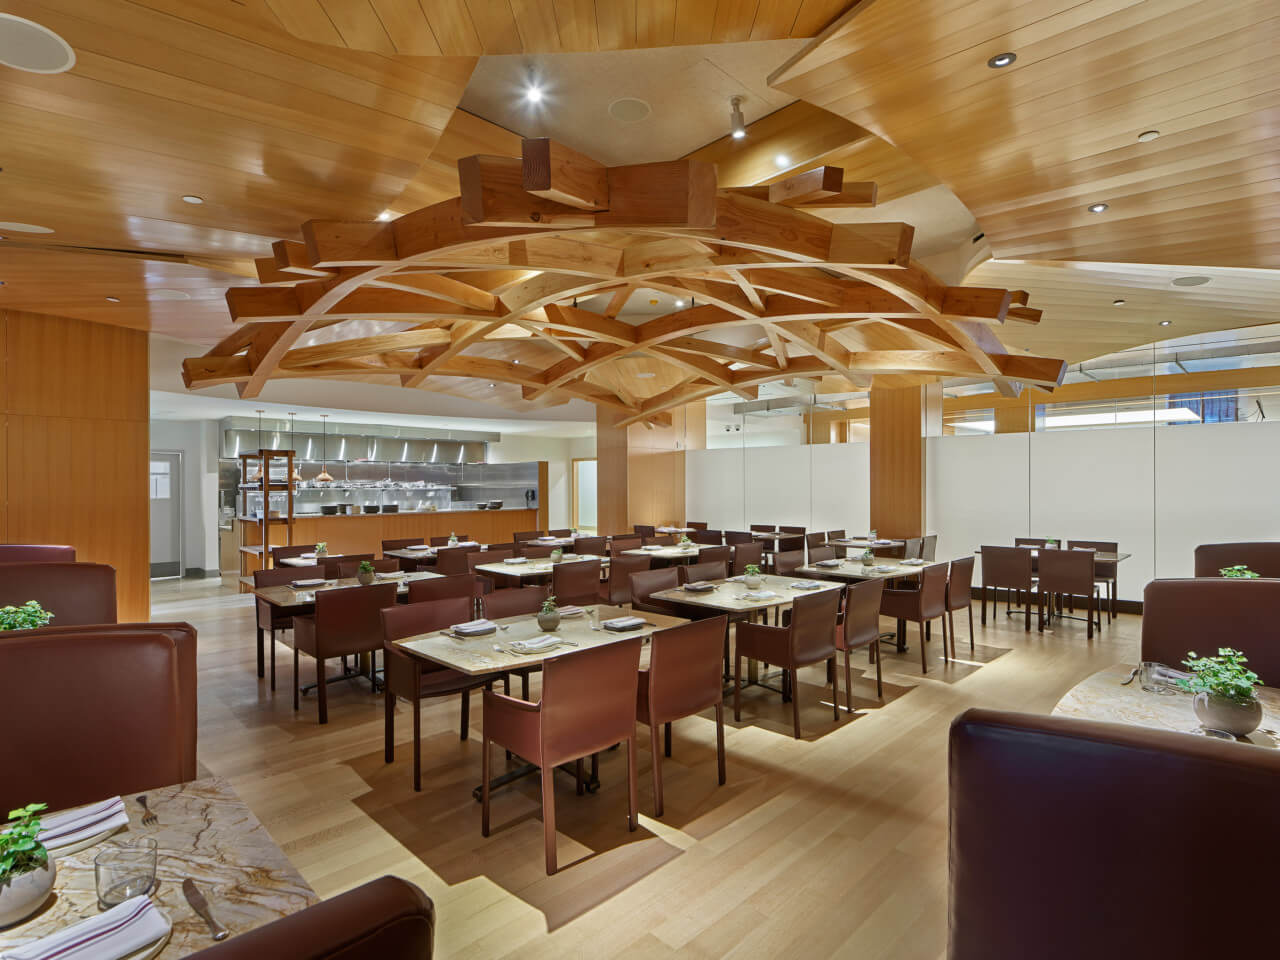 interior of a cafe with a sculpture wood installation on the ceiling